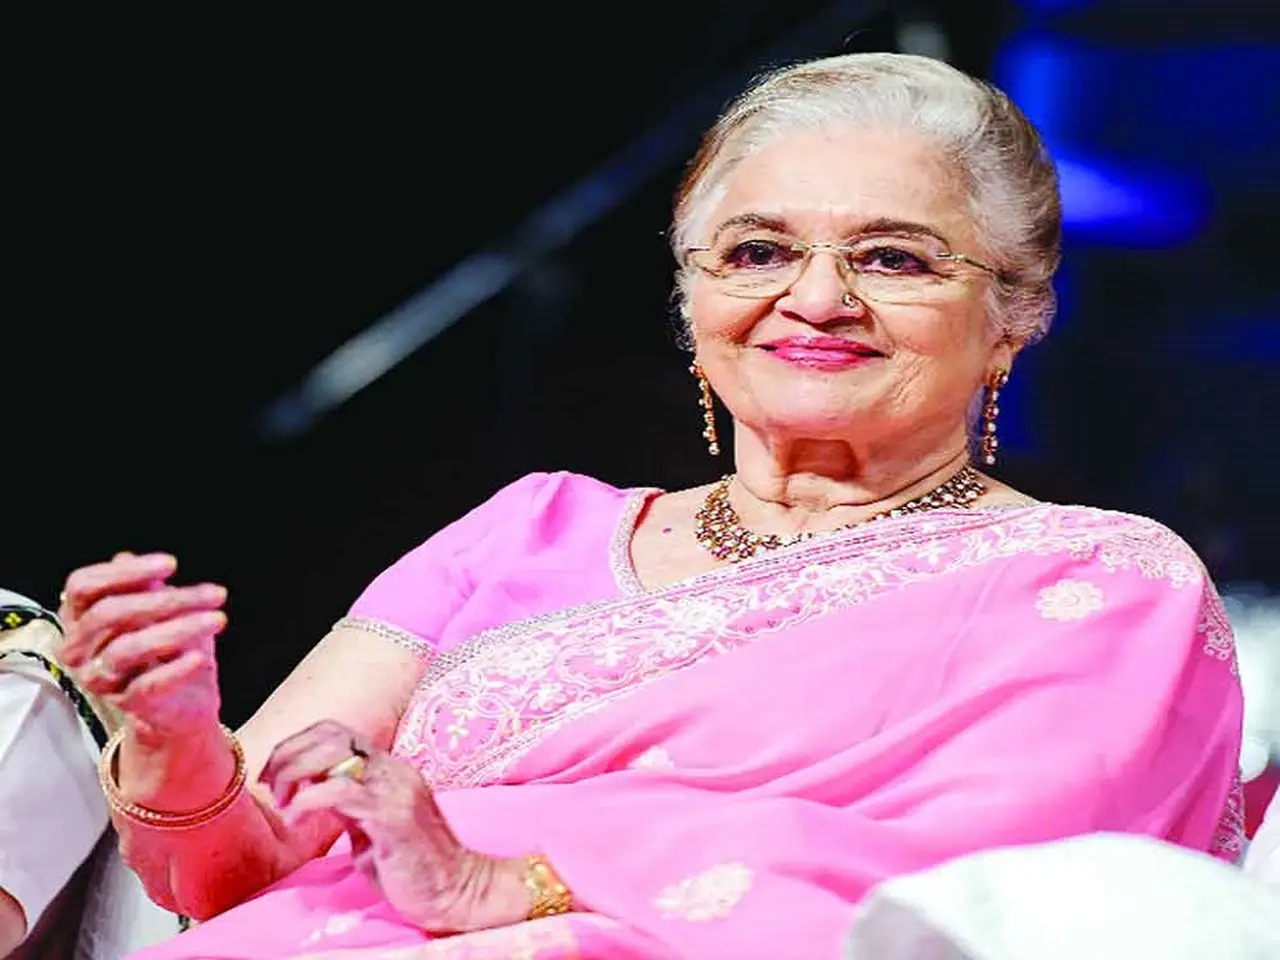 Asha Parekh received Padma Shri in 1992 and led the Central Board for Film Certification (CBFC) from 1998 to 2001.